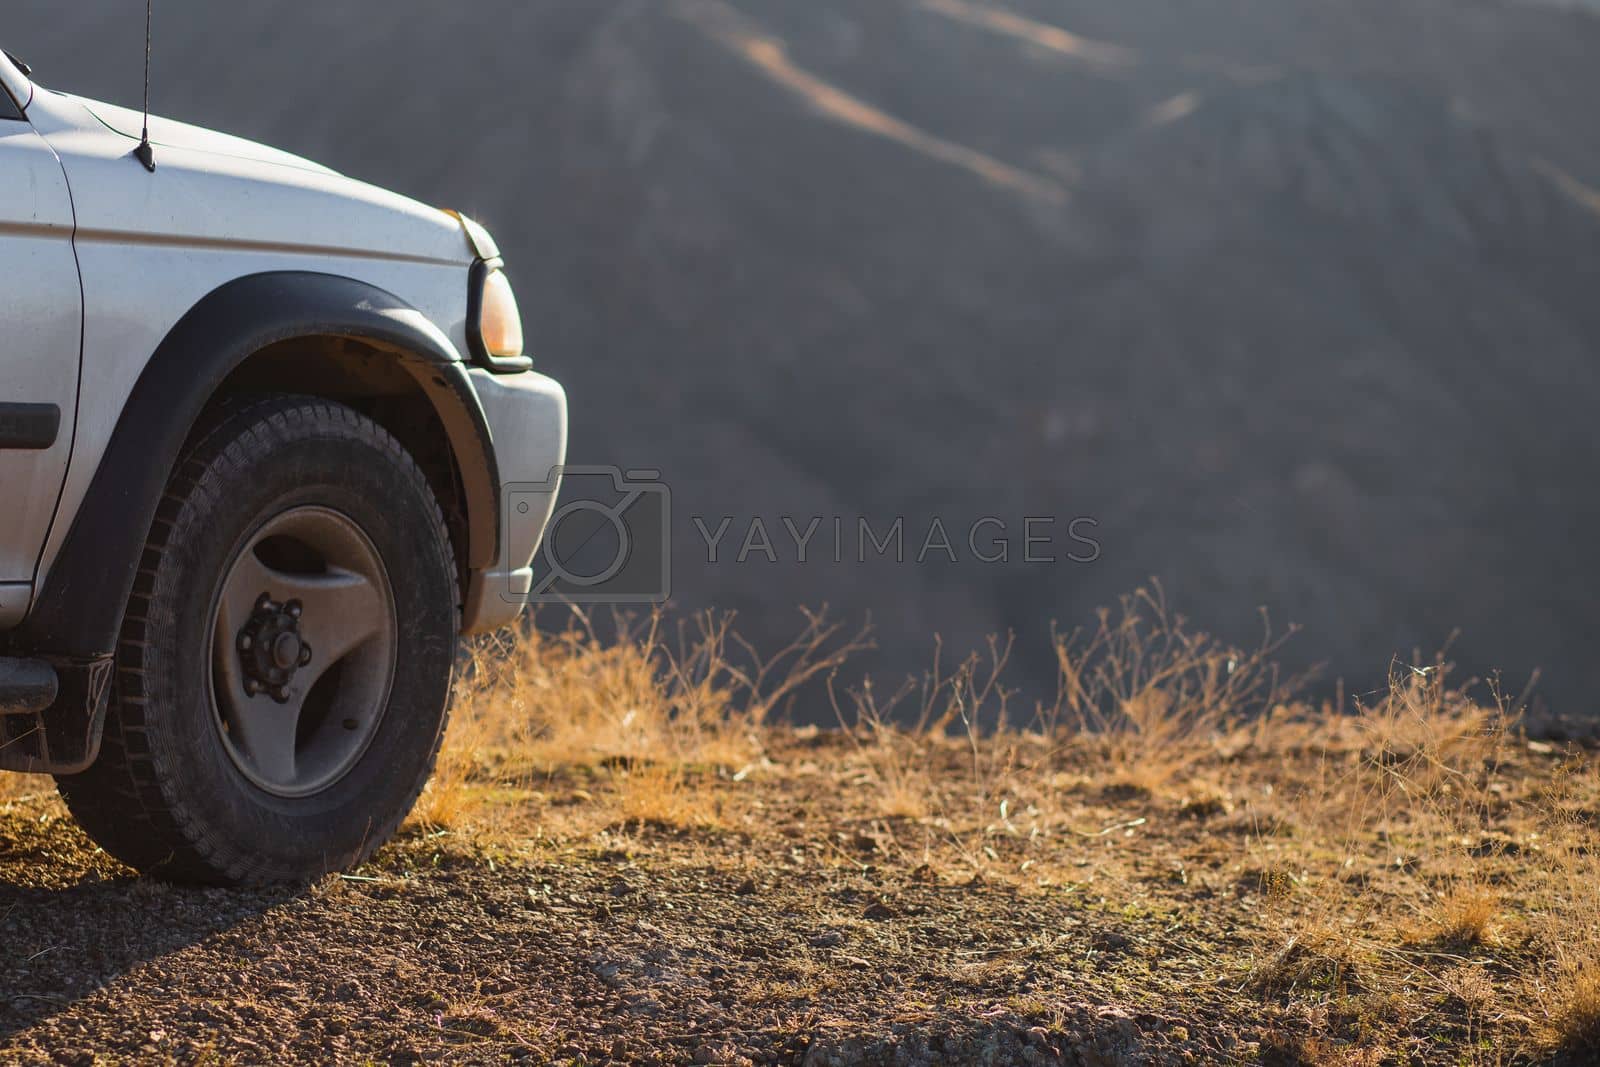 Royalty free image of Travel car concept with 4x4 SUV car in nature, copy space by Rom4ek